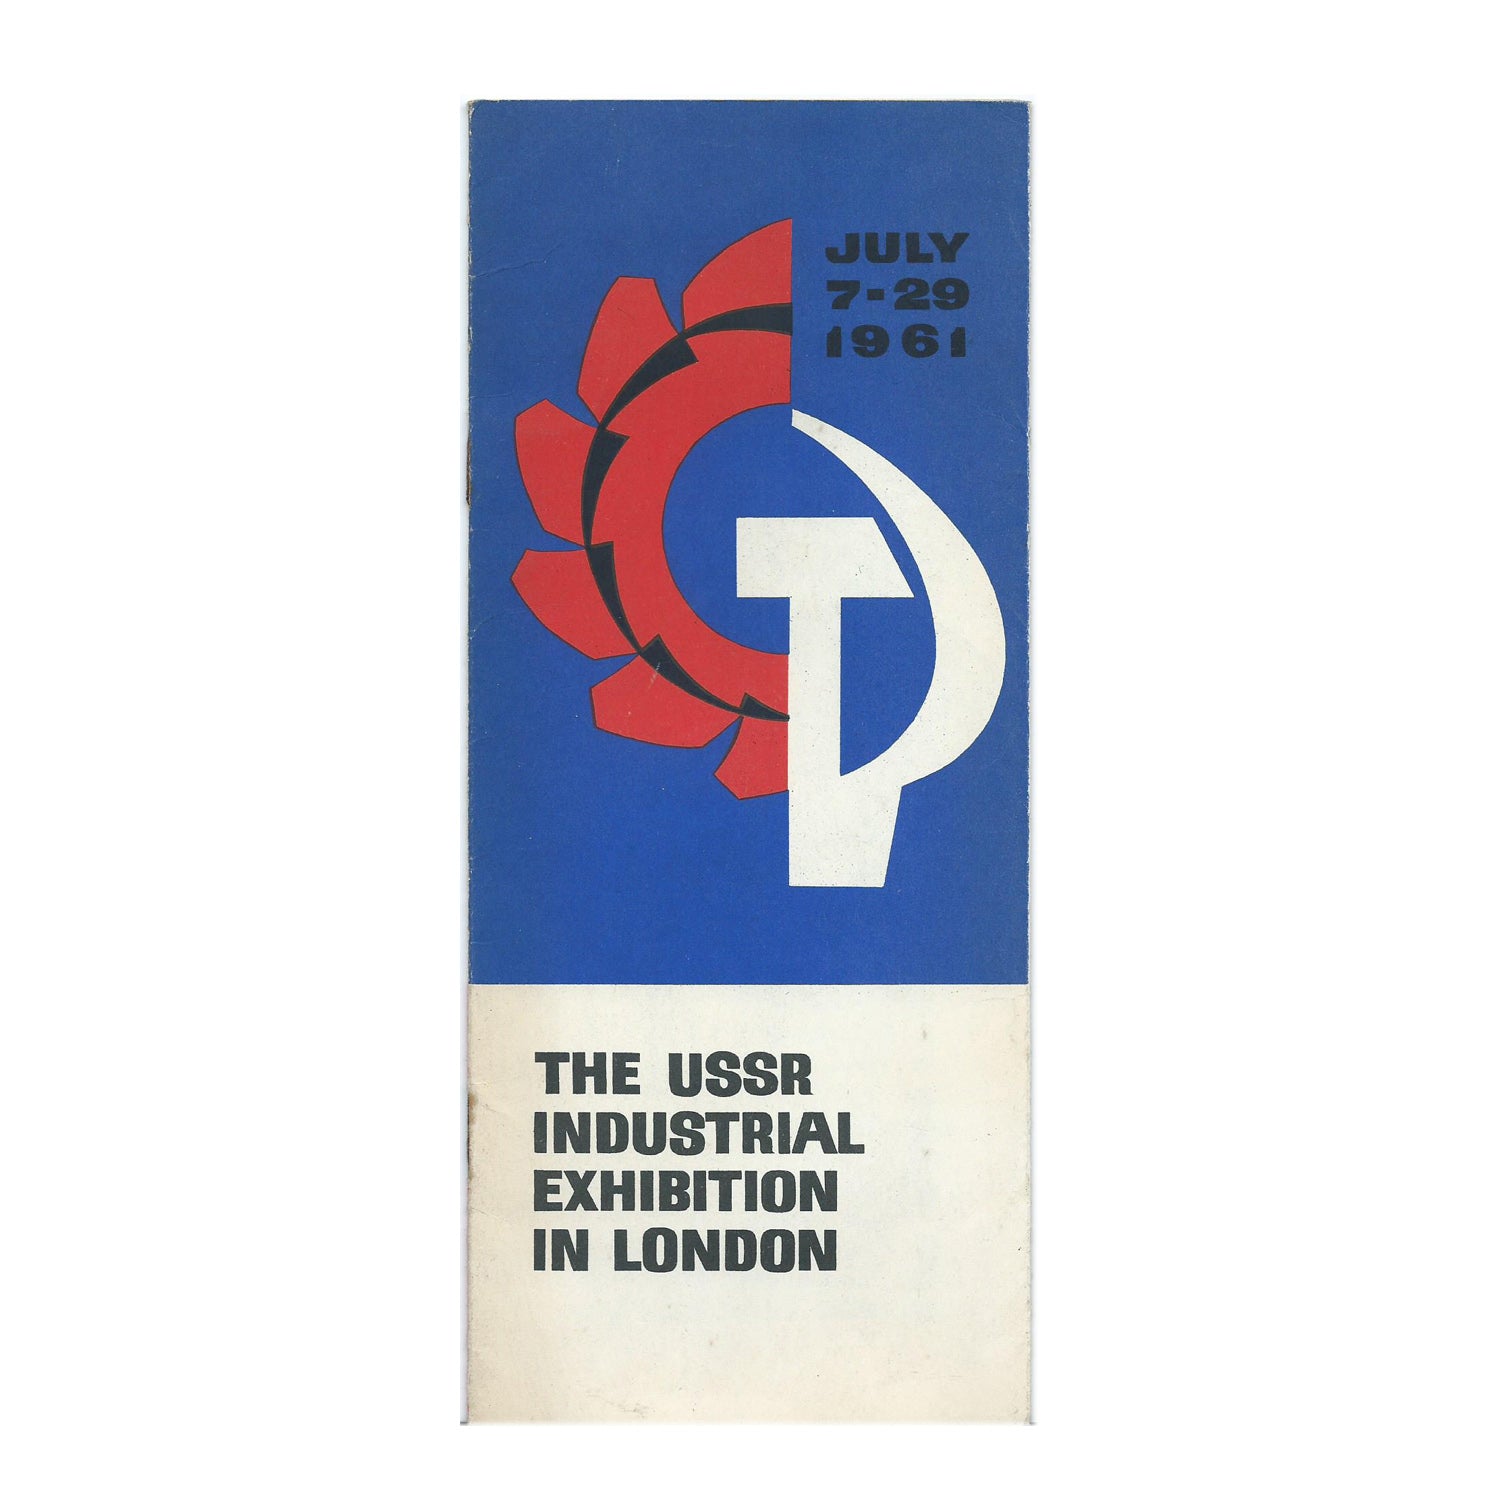 The USSR Industrial Exhibition in London (leaflet)